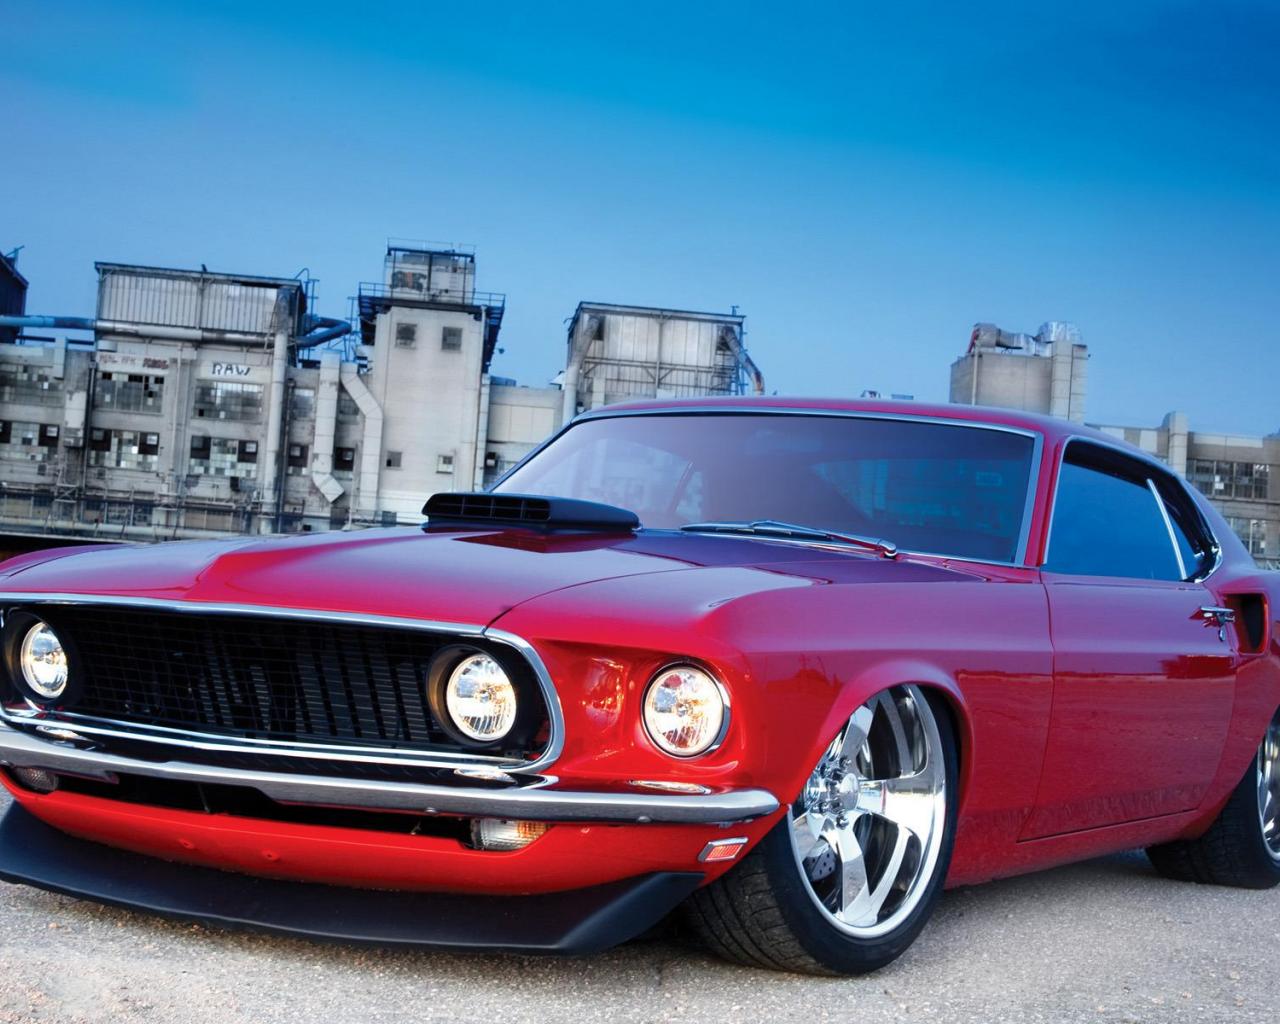 Cars Ford 1969 ford mustang Mustang HD Wallpapers, Desktop ...